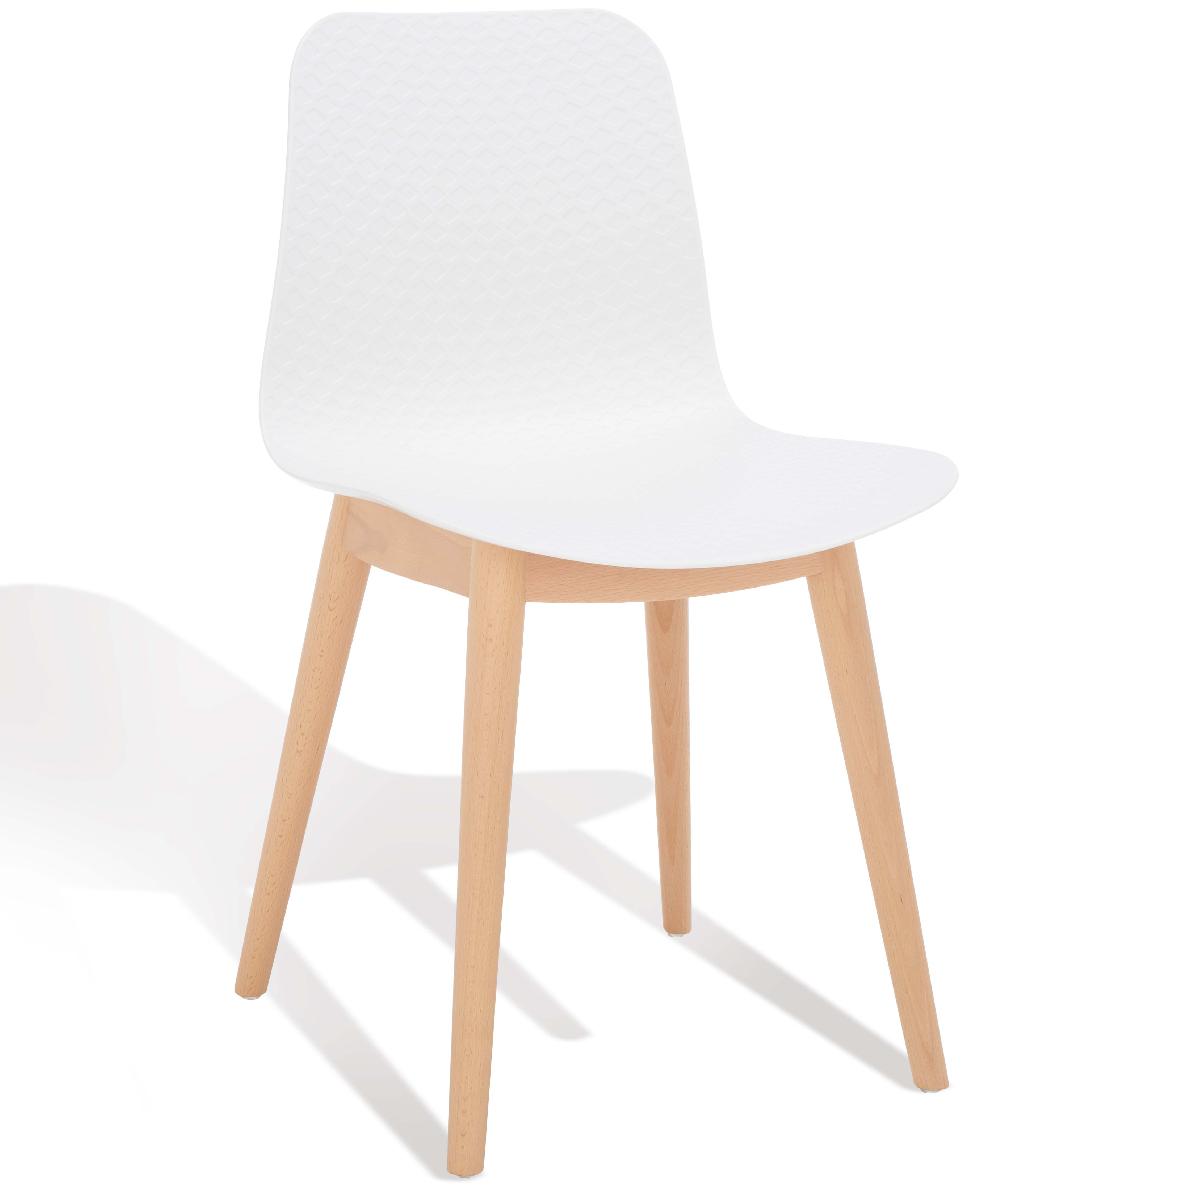 Safavieh Couture Haddie Molded Plastic Dining Chair